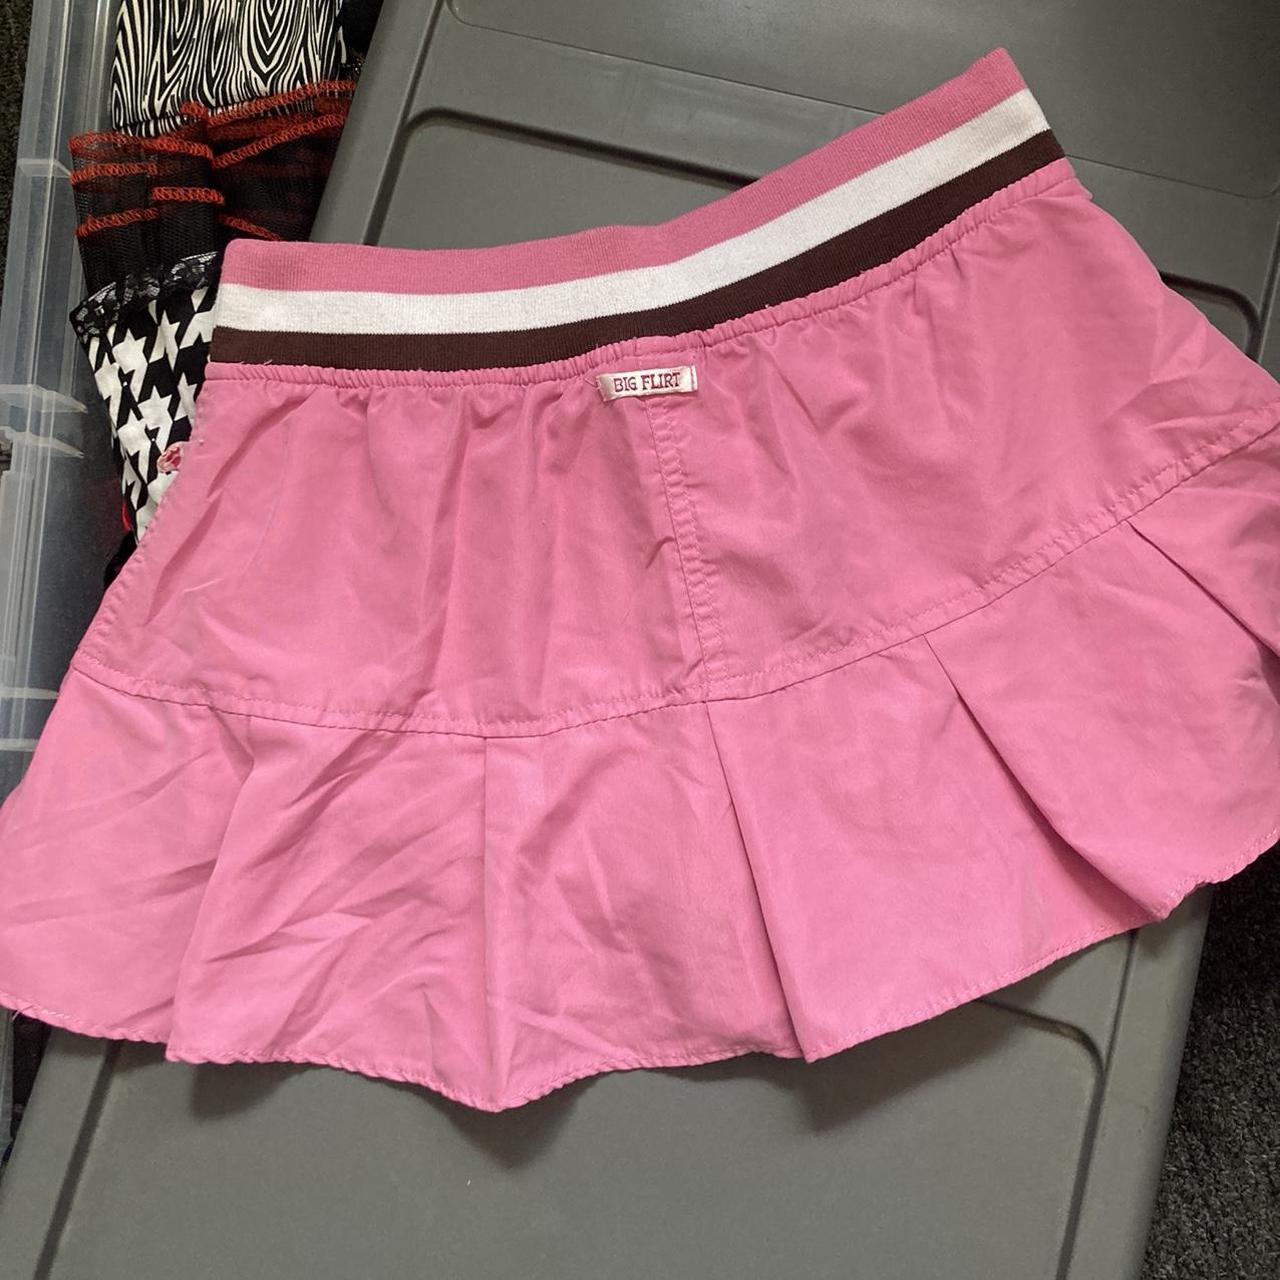 Big flirt pleated pink skirt. Has a brown and white... - Depop